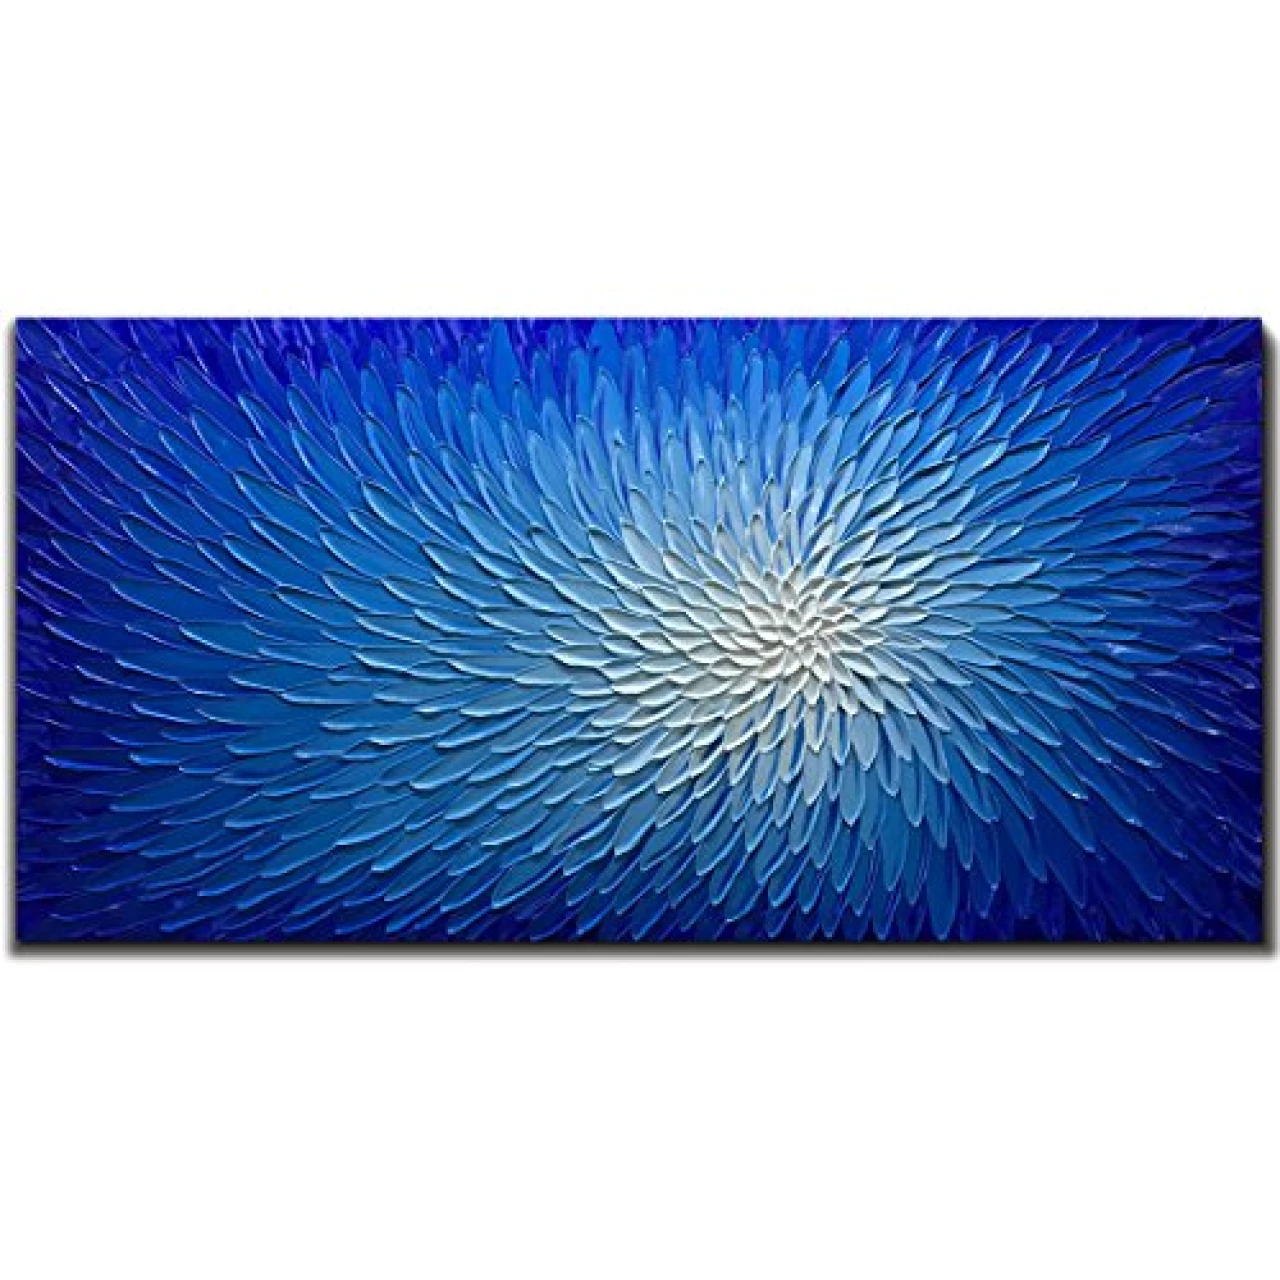 AMEI Art Paintings,30x60 Inch Ocean Blue White Abstract Wall Art Hand-Painted Oil Paintings Modern Artwork Textured Flower Canvas Paintings Wood Inside Framed Wood Inside Framed Ready to Hang